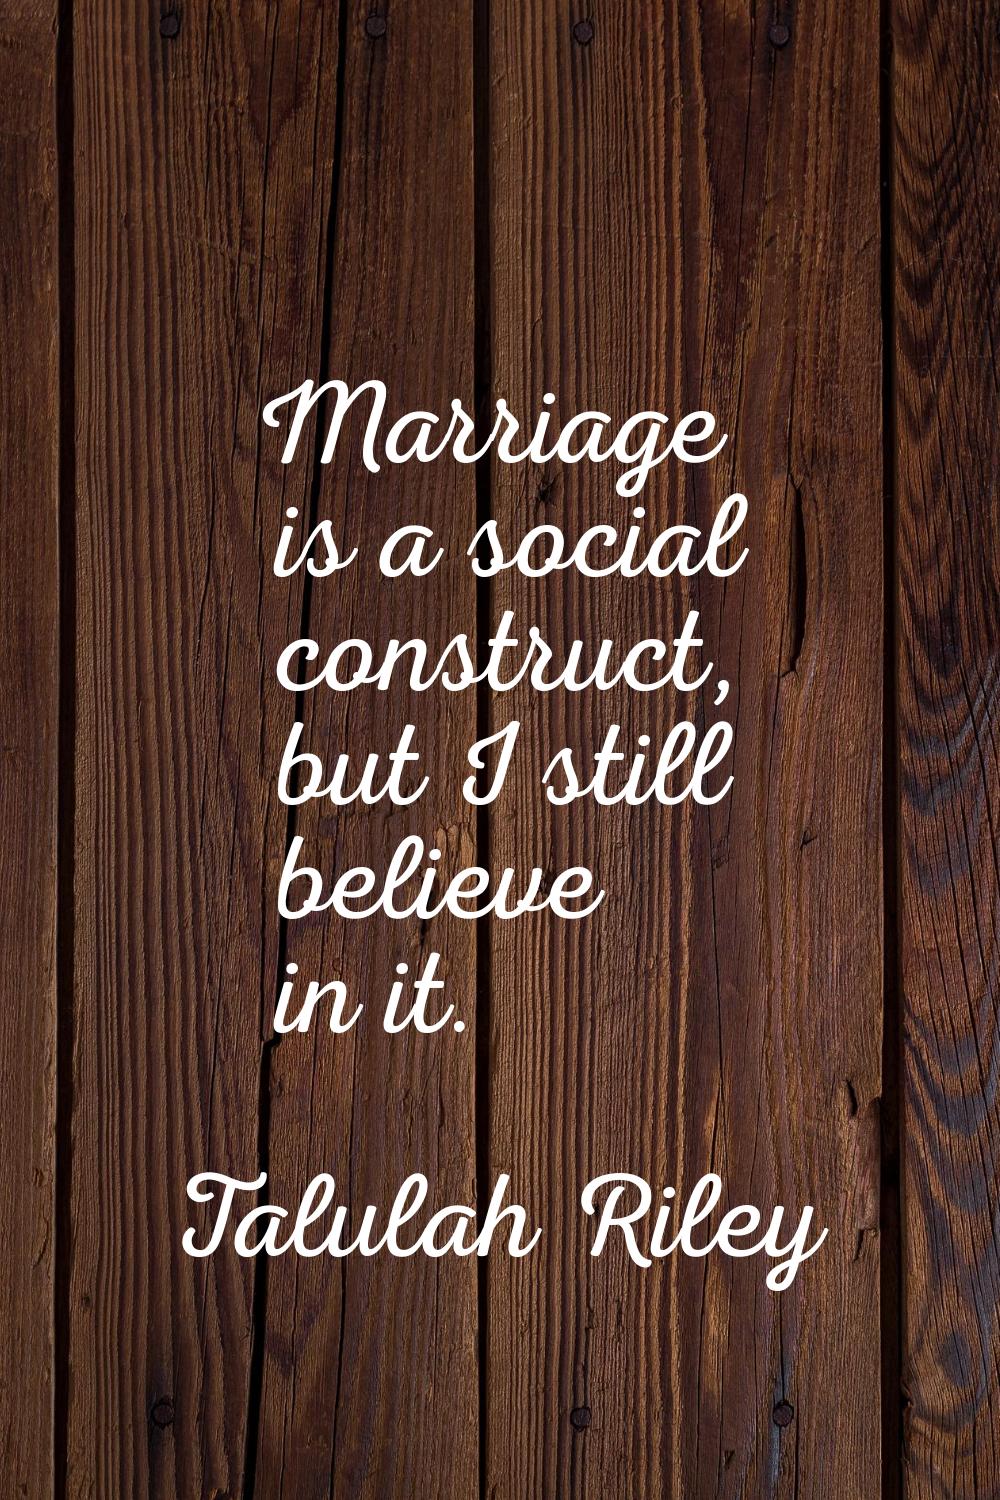 Marriage is a social construct, but I still believe in it.